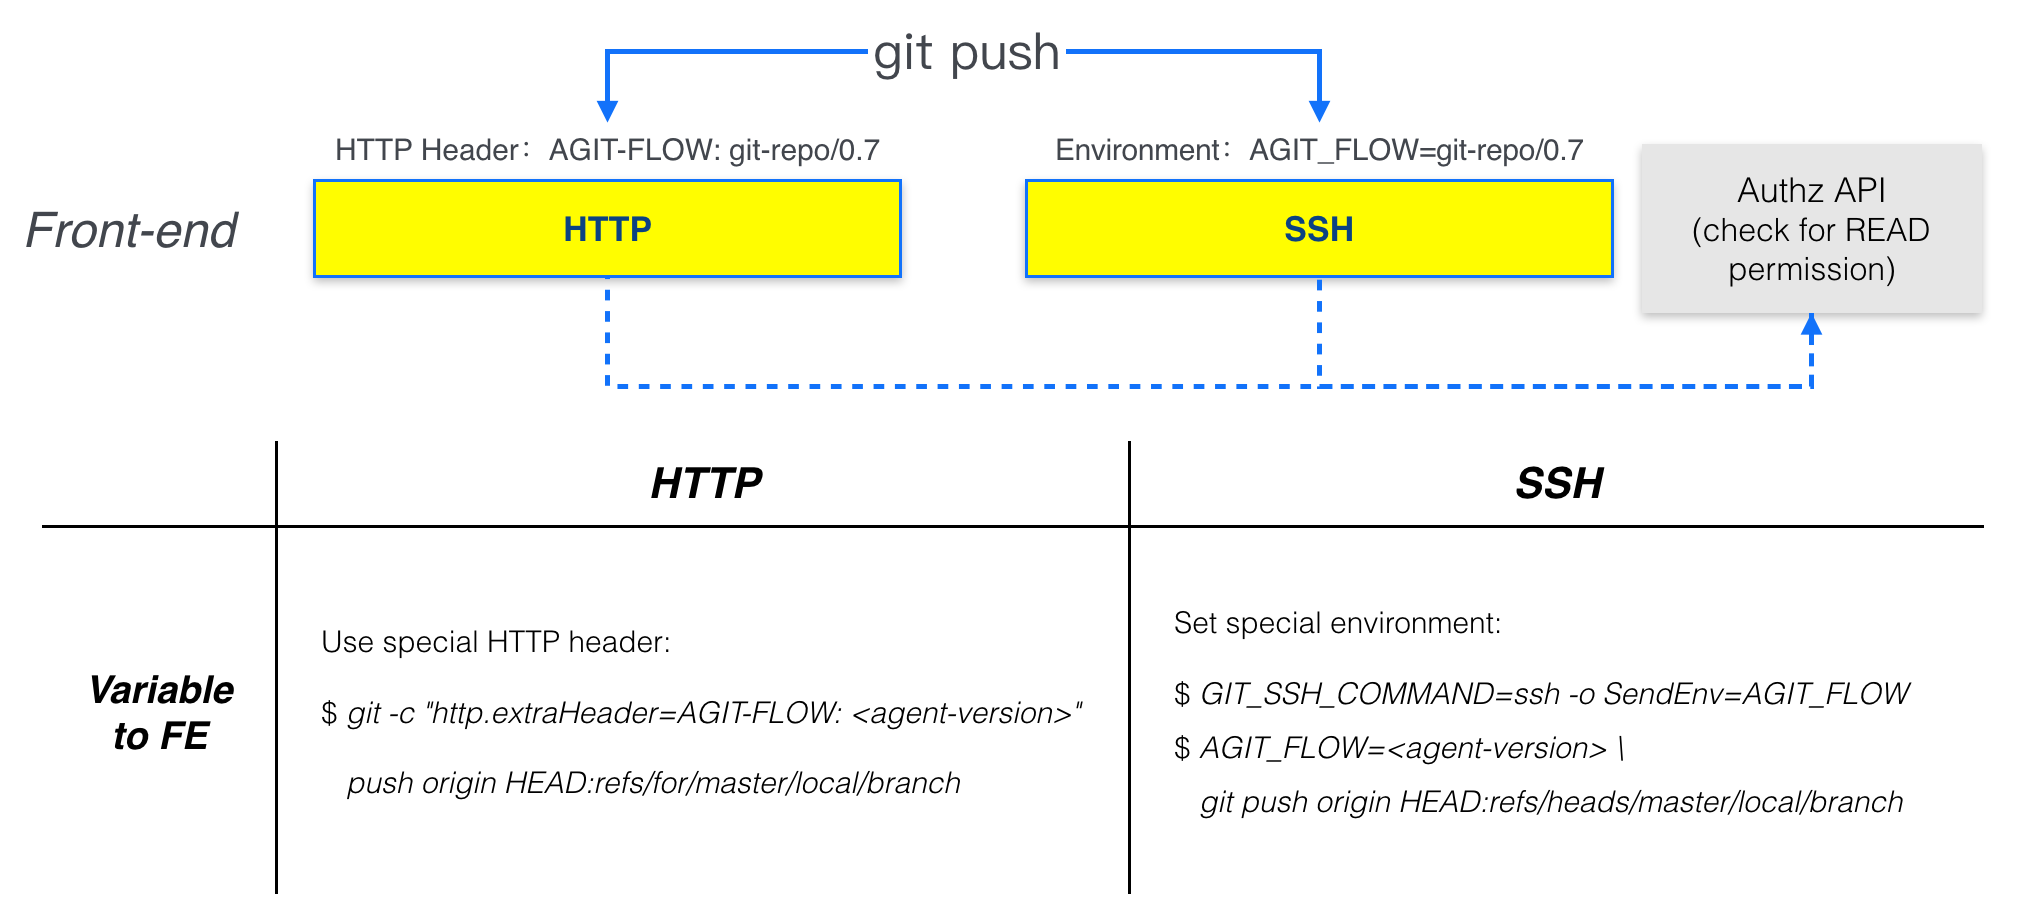 Fig: Front-end authentication for AGit-Flow